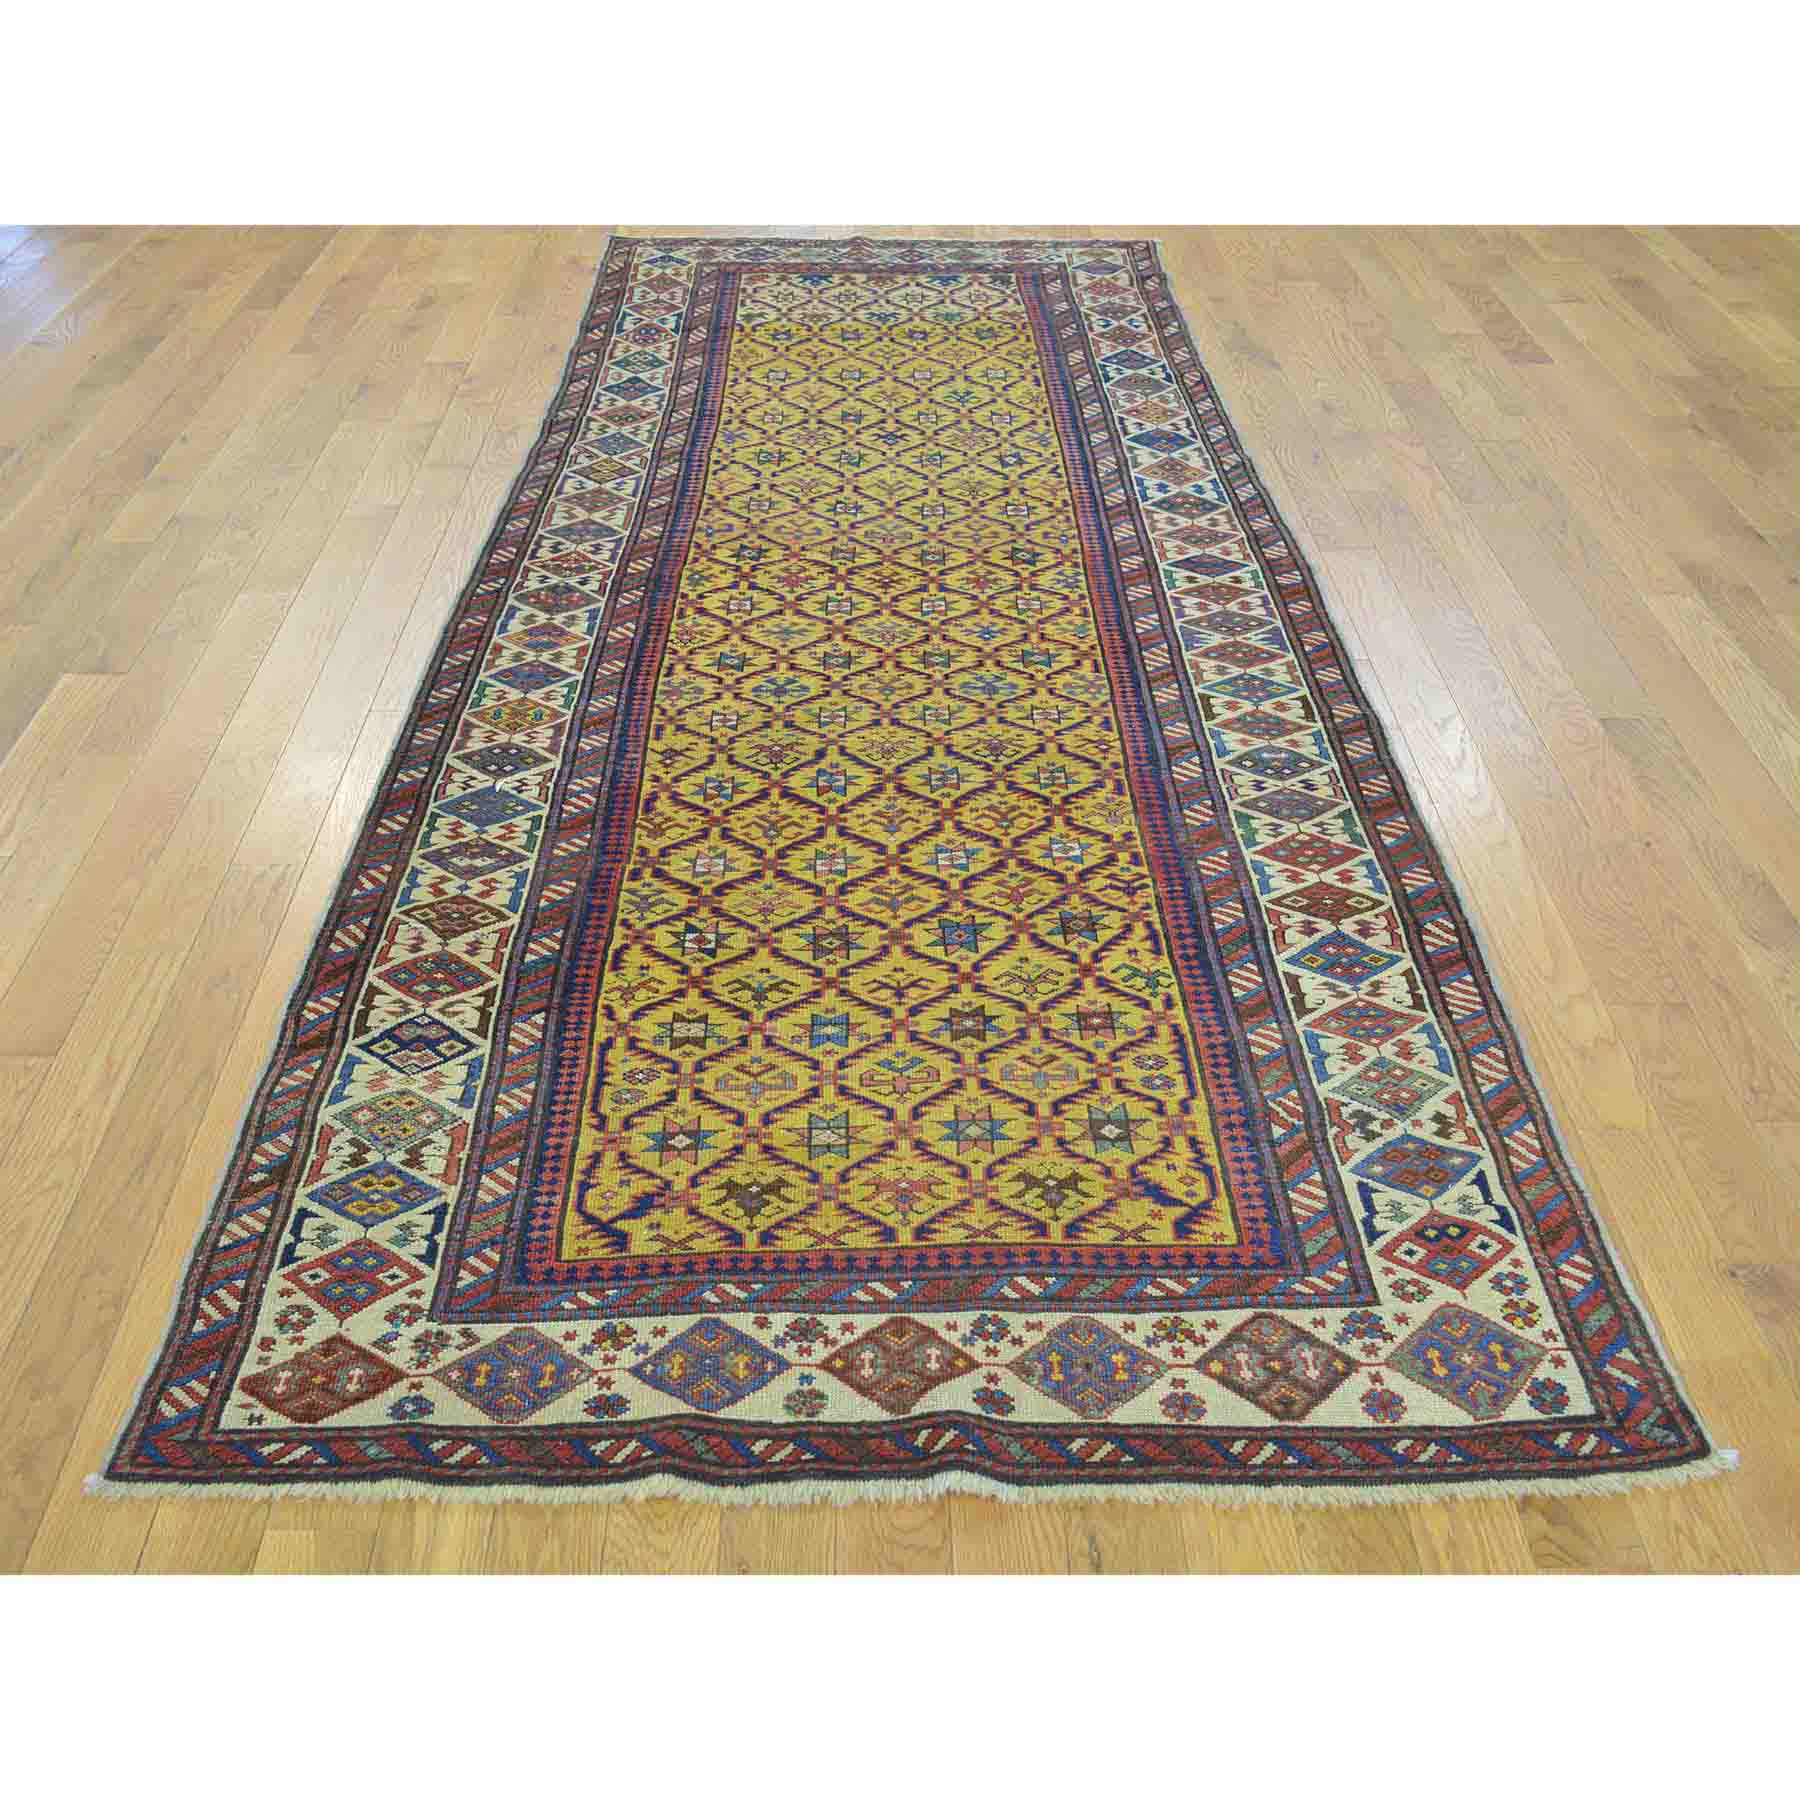 Antique-Hand-Knotted-Rug-141150